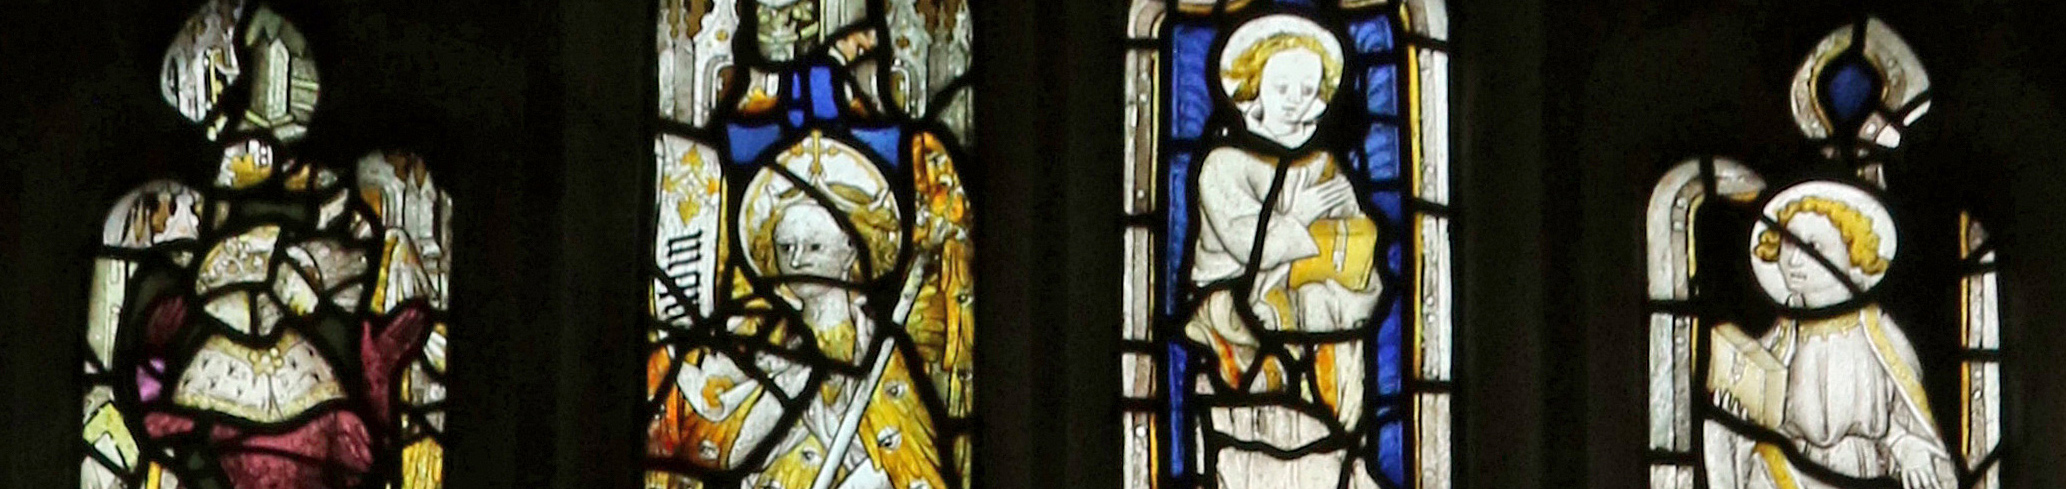 Details from South Aisle window of St Botolph